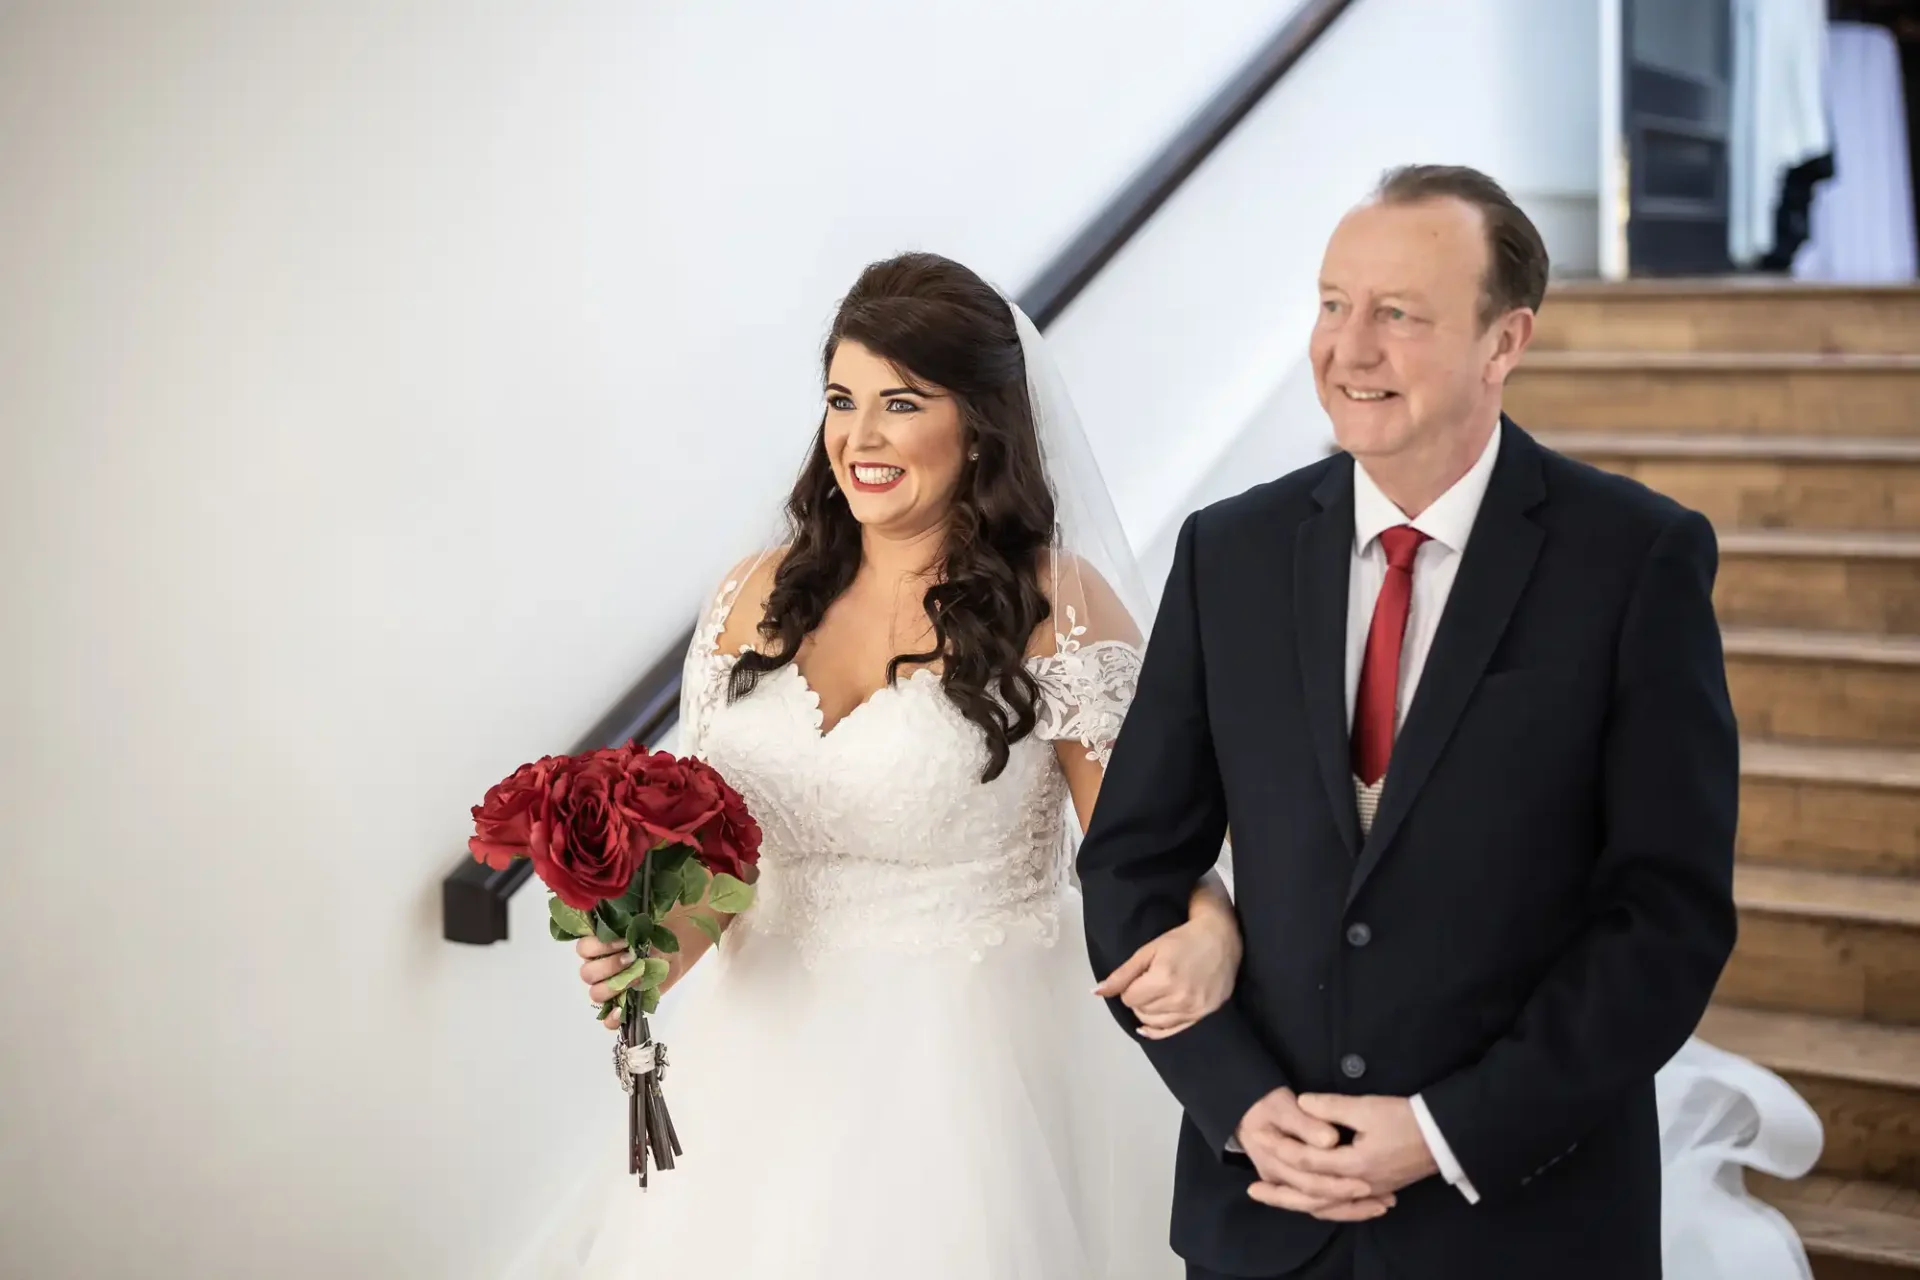 Bride in a white dress holding a bouquet of red roses walks down a staircase with an older man in a suit, both smiling.